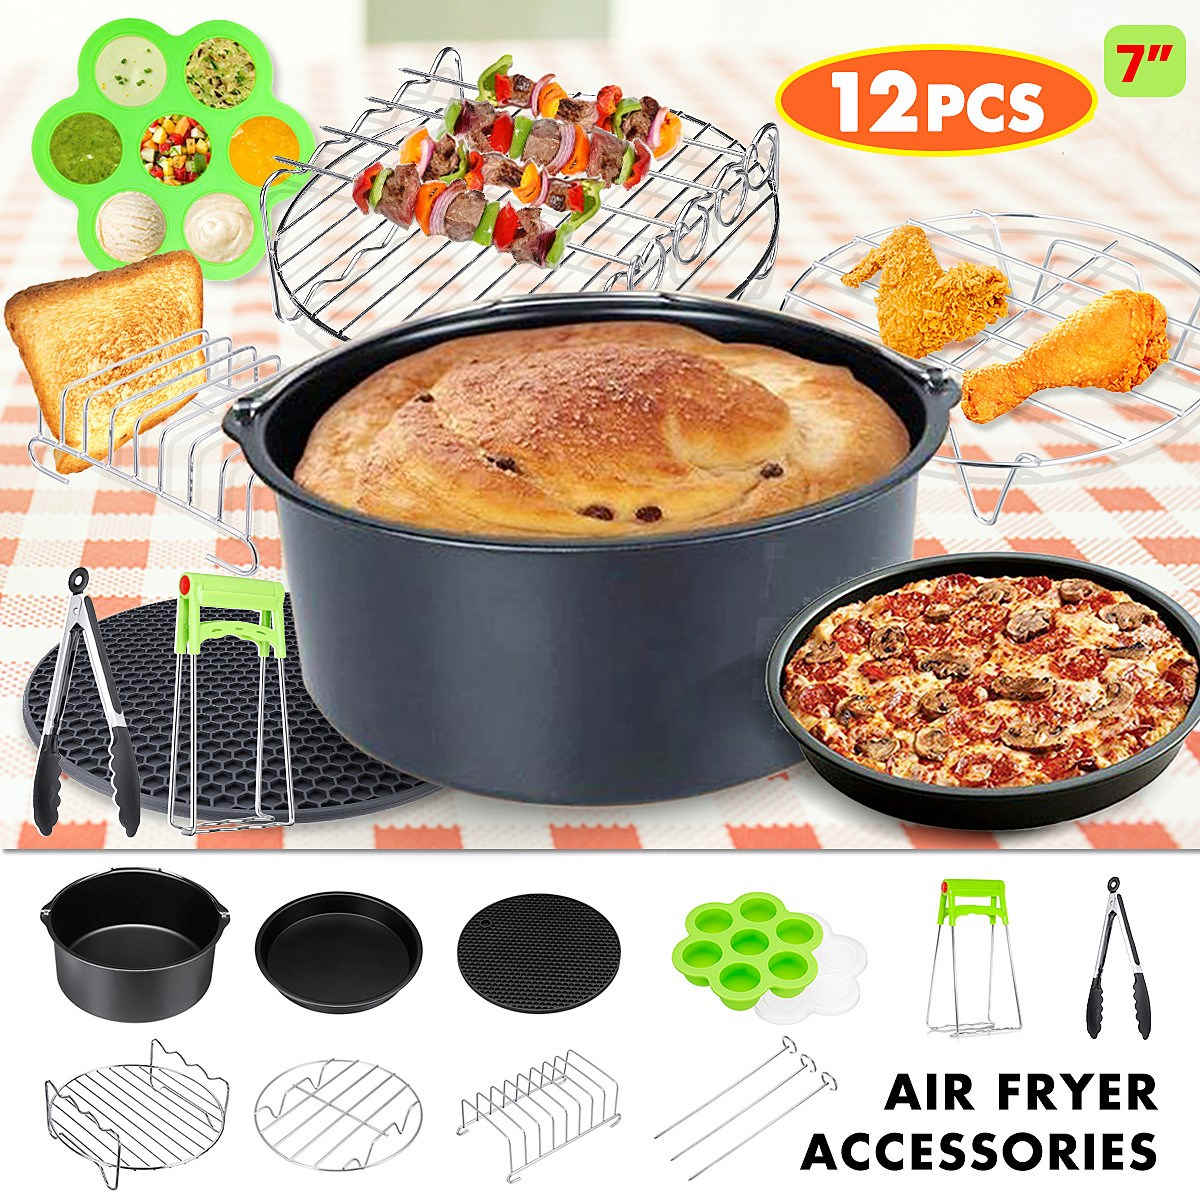 12Pcs Air Fryer Accessories 9 Inch for Philips Air fryer 3.2~6.8QT Baking Basket Pizza Plate Grill Pot Kitchen Cooking Tools